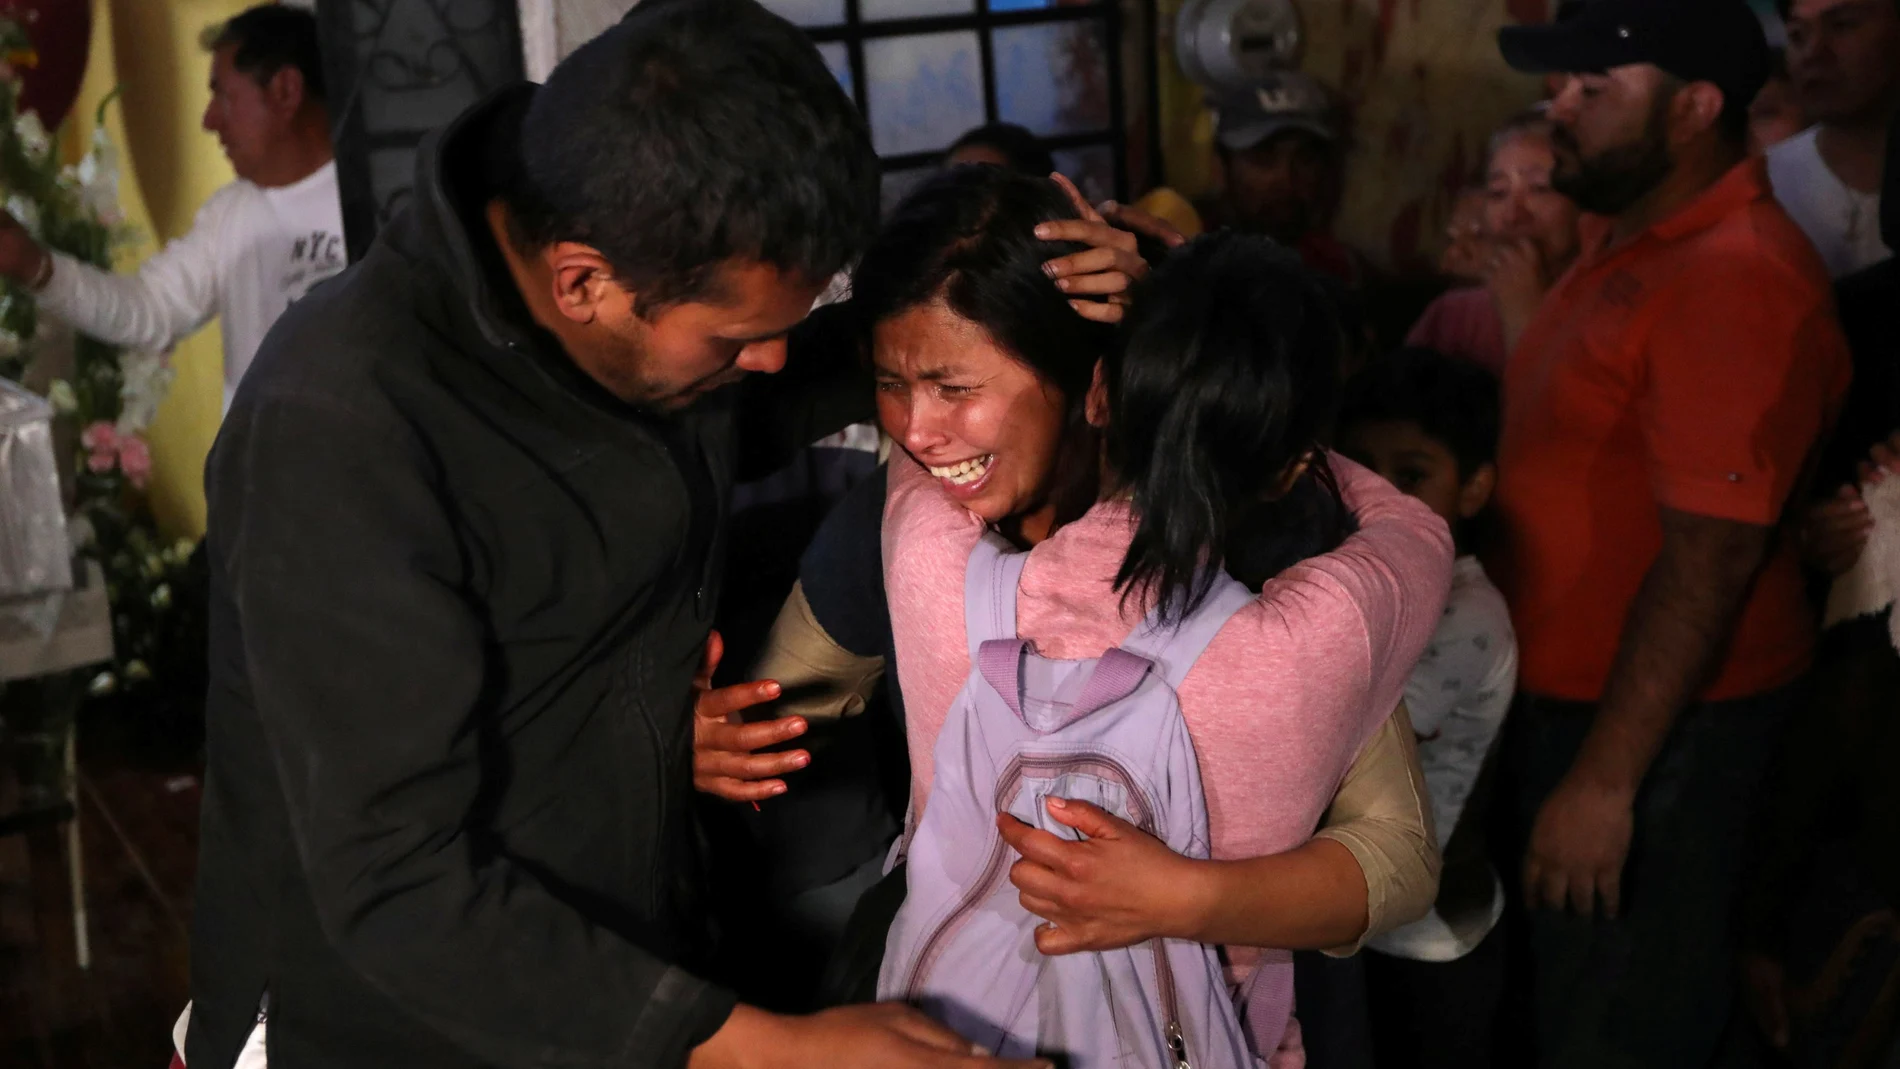 Maria Magdalena, mother of Fatima Cecilia Aldrighett, who went missing and whose body was discovered over the weekend inside plastic garbage bag, reacts as Fatima's coffin arrives at their house in Mexico City